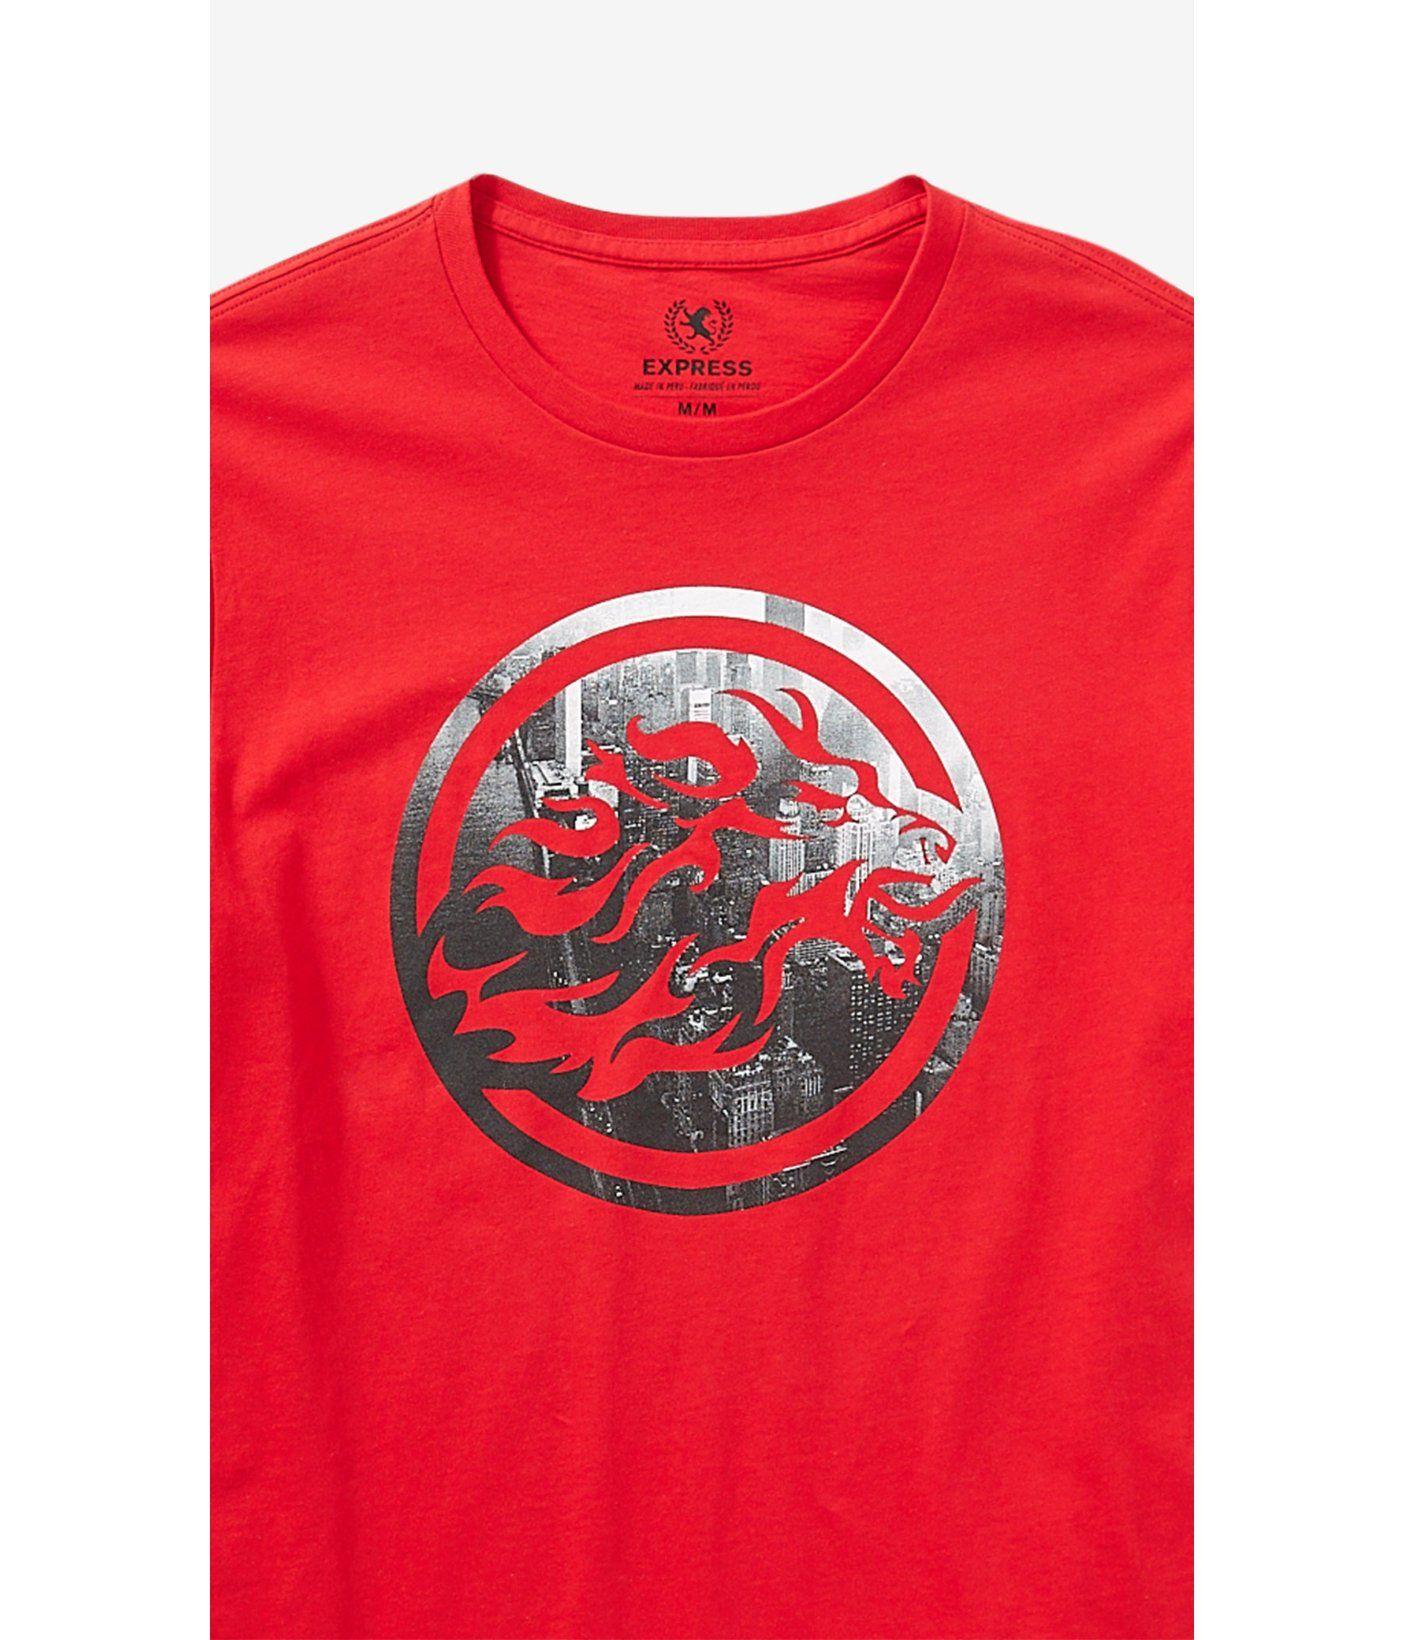 Express Lion Logo - Express City Lion Circular Graphic Tee in Red for Men